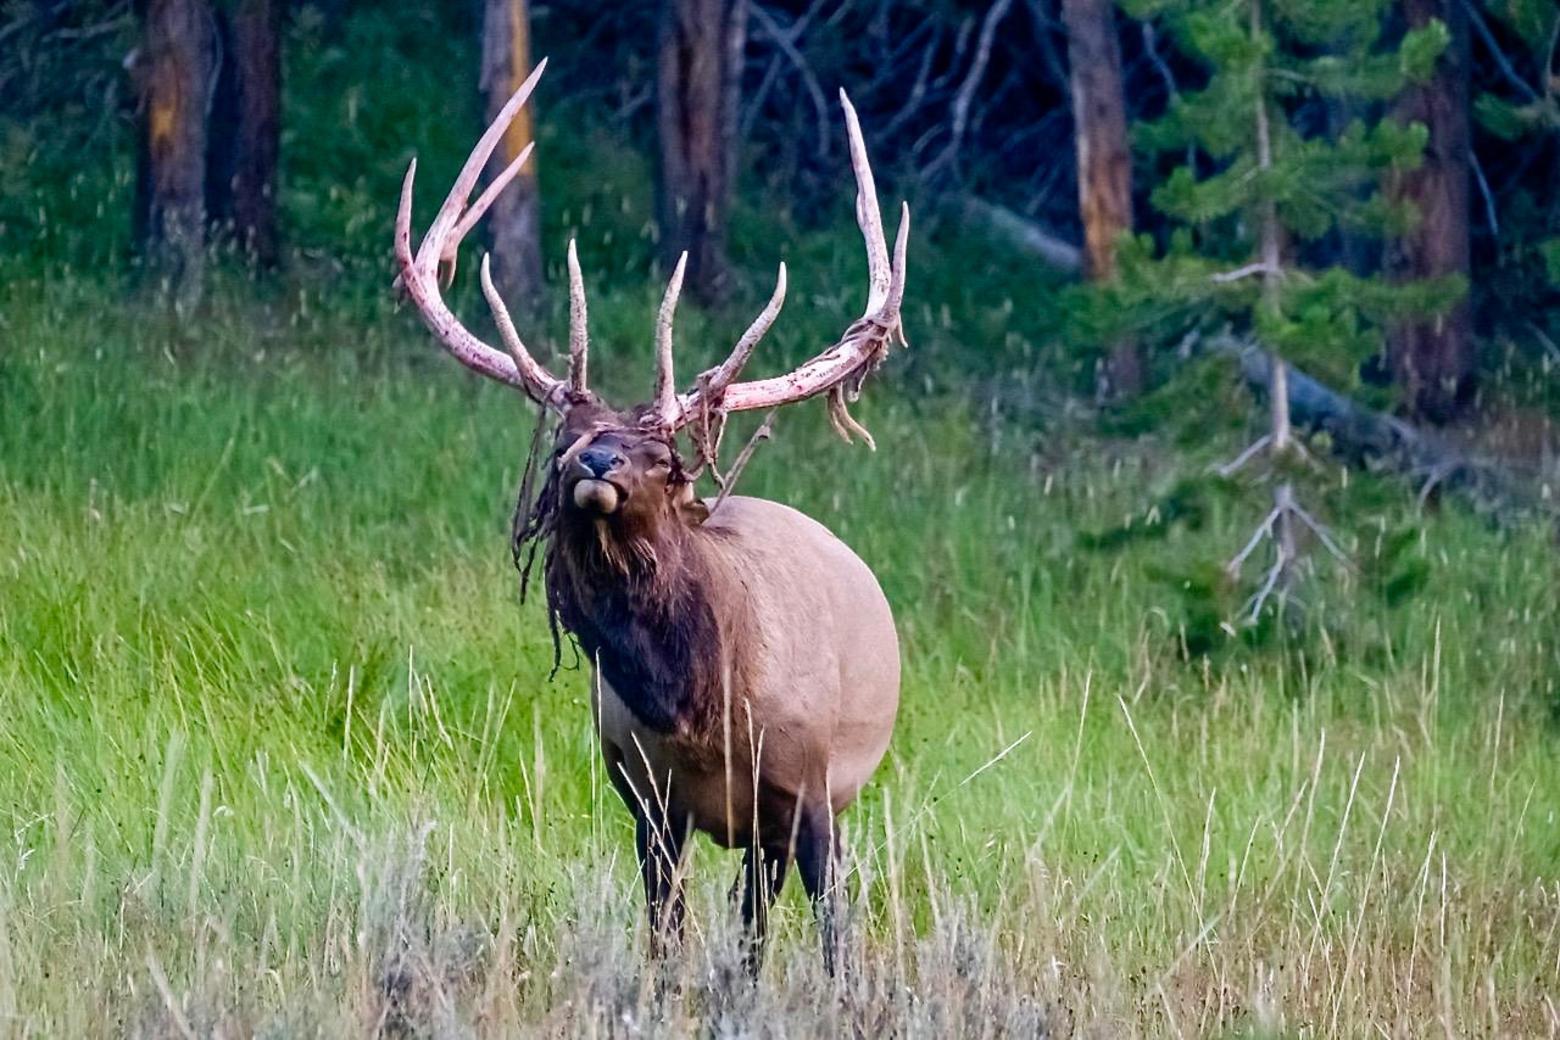 Nearby, in fact, in a neighboring meadow, a second bull at the same seasonal stage as the first, struggles with the annoying dread-lock tangle of dead velvet that hangs around his face. His velvet is mostly gone exposing the bone white of his newly-commissioned antlers.